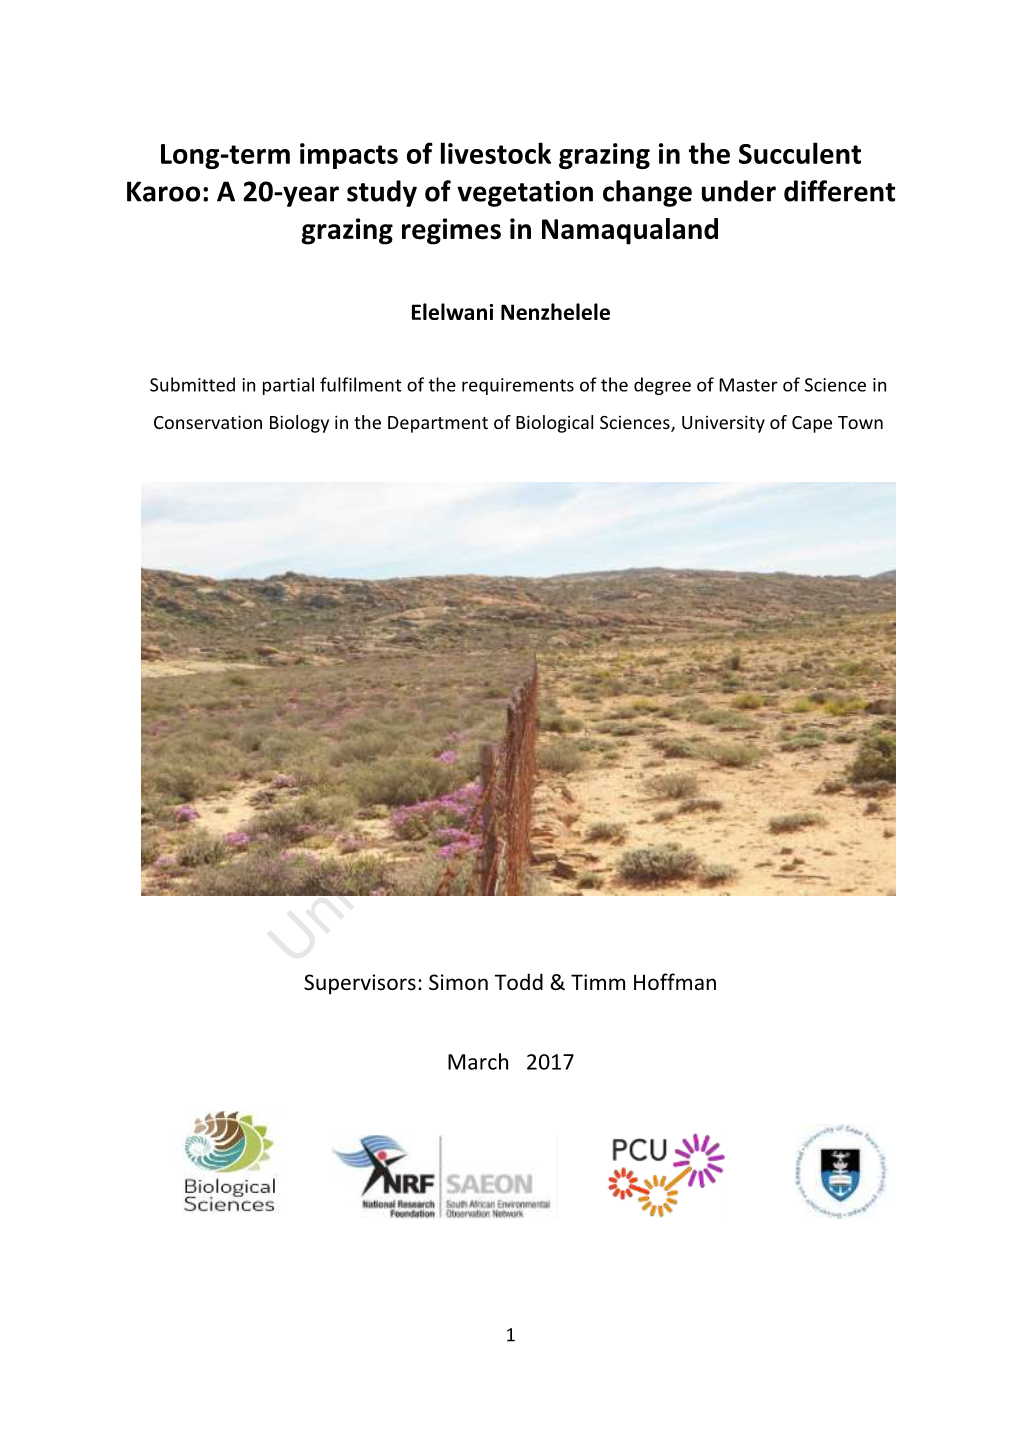 Long-Term Impacts of Livestock Grazing in the Succulent Karoo: a 20-Year Study of Vegetation Change Under Different Grazing Regimes in Namaqualand